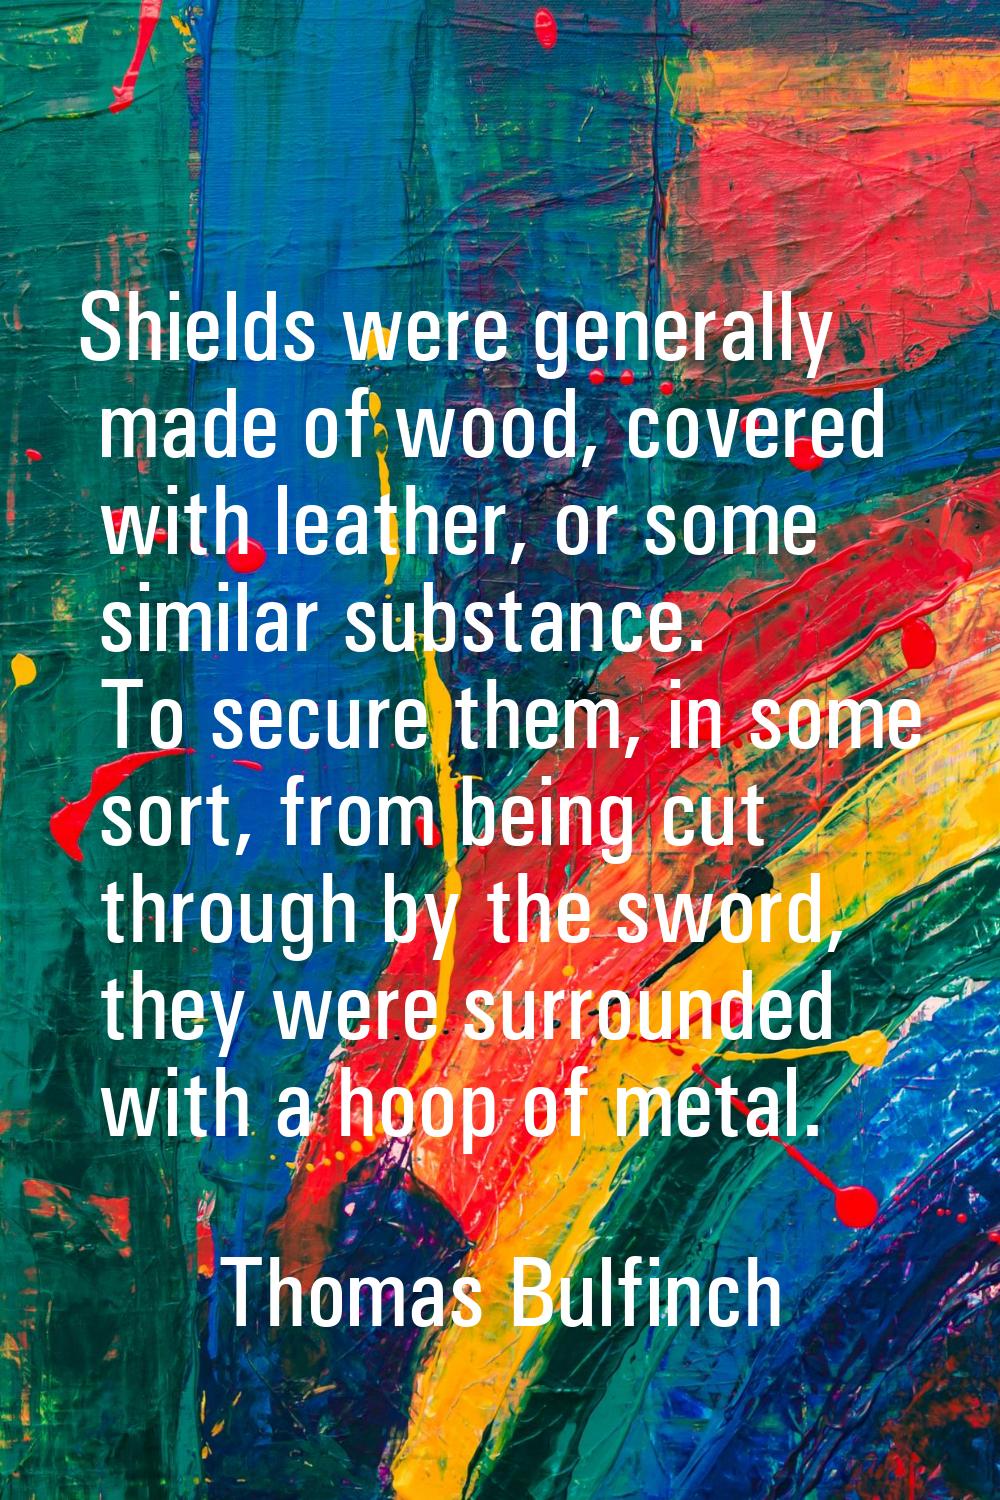 Shields were generally made of wood, covered with leather, or some similar substance. To secure the